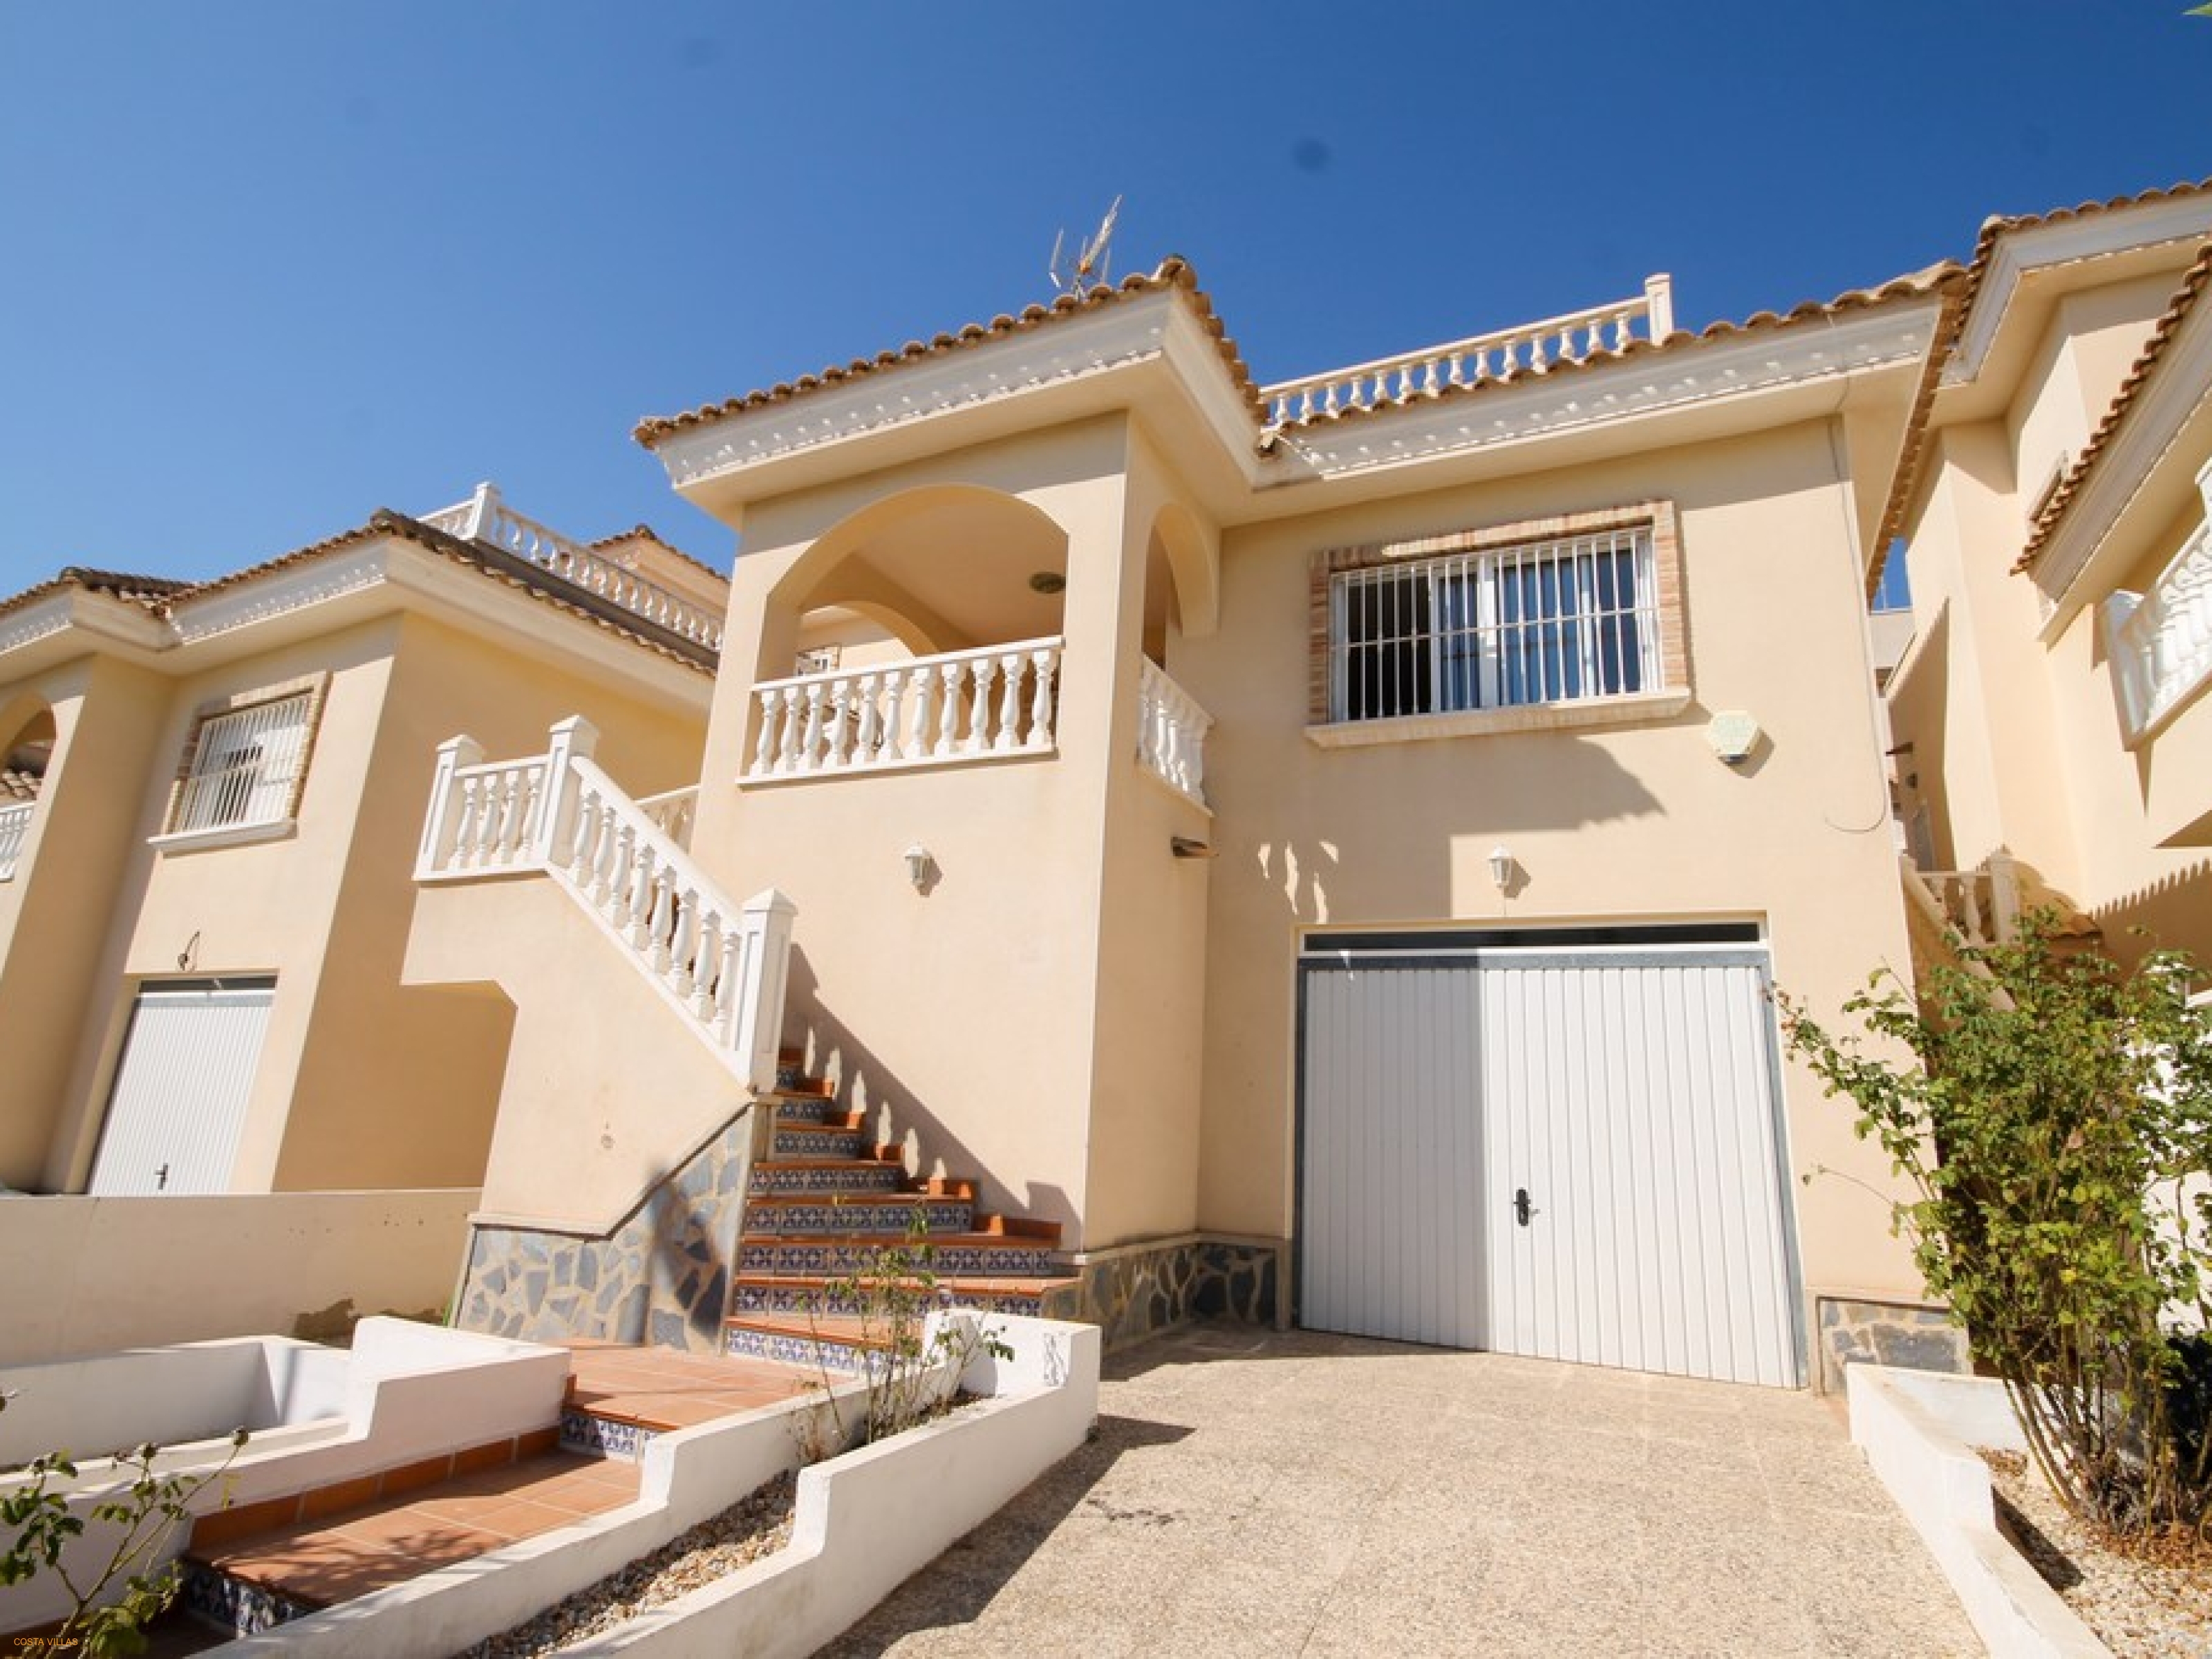 3 Bed Detached Villa with Garage and Room to add a Pool